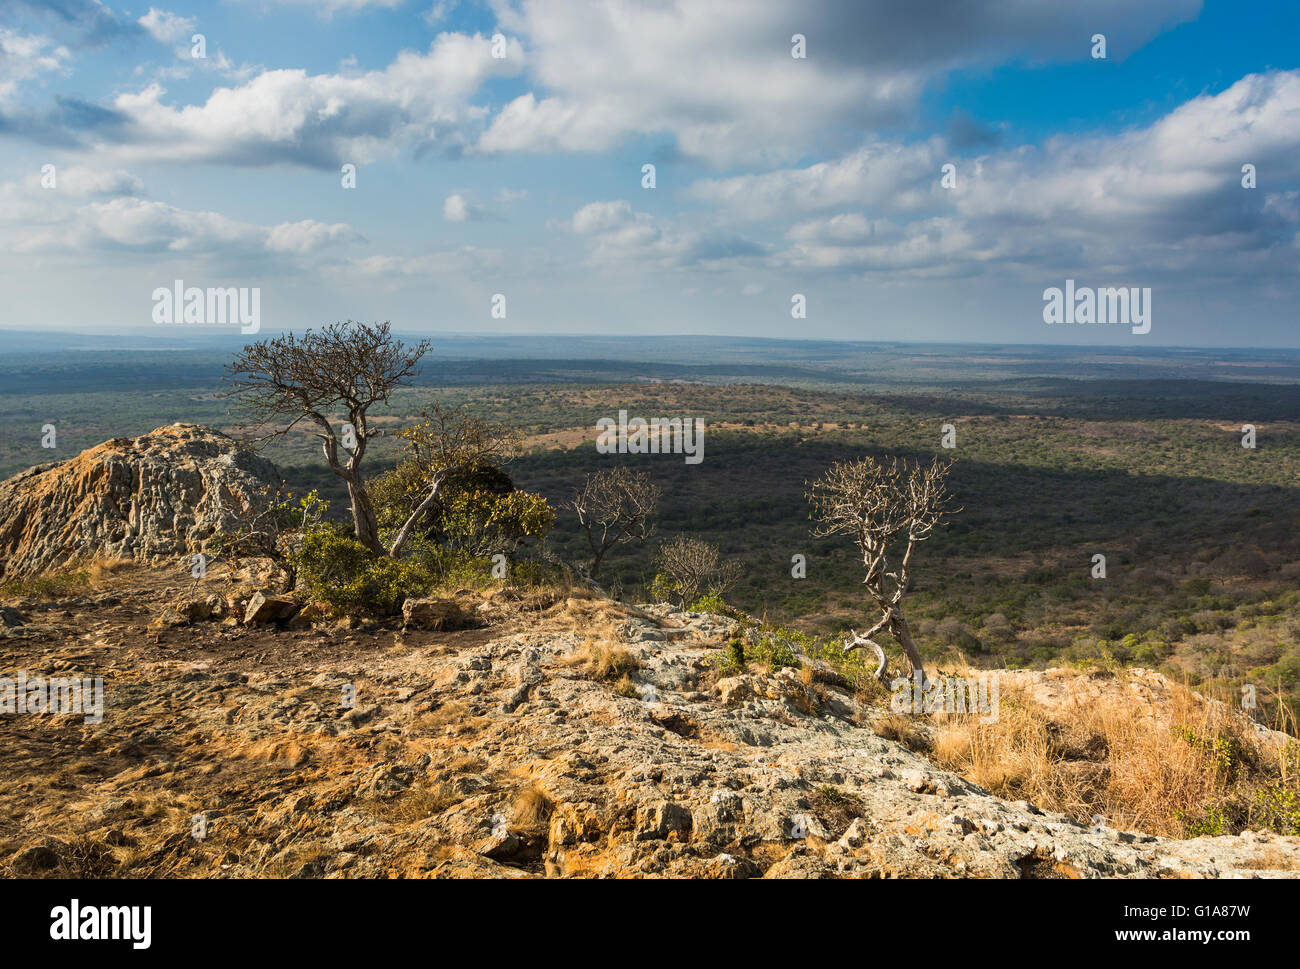 View from the top of King's Mountain, a sacred site to the Zulu people, KwaZulu Natal, South Africa Stock Photo